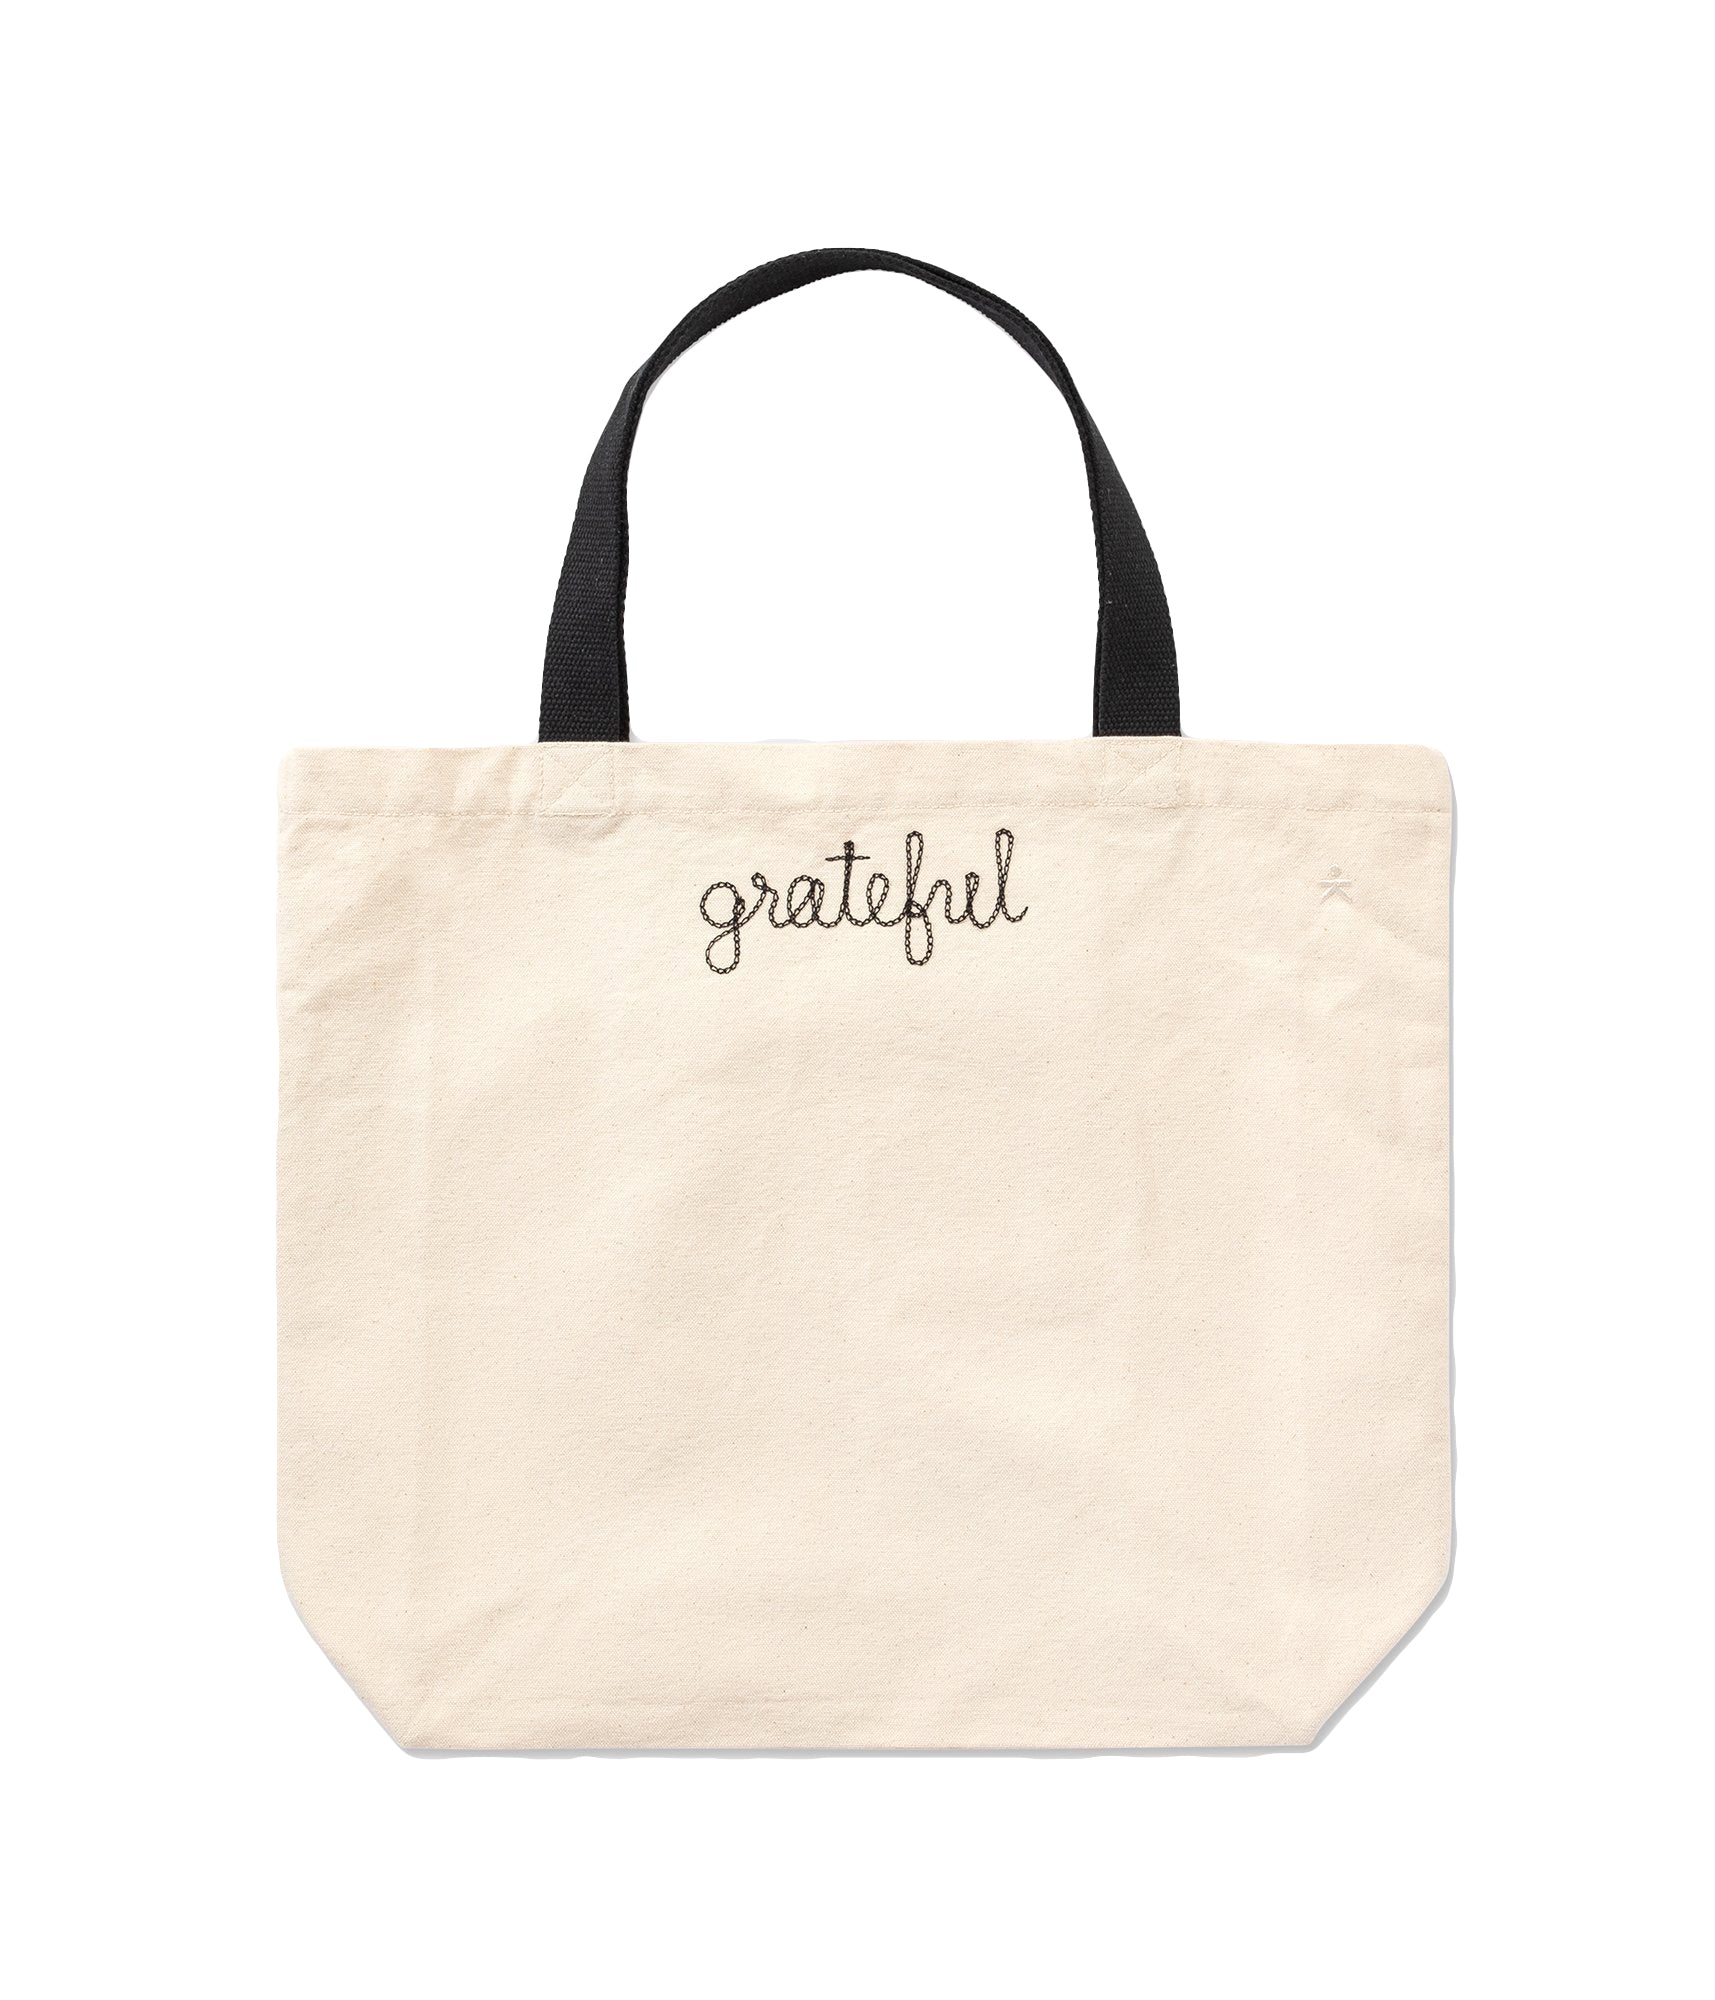 Custom Printed Organic Canvas Tote Bags, Personalized Totes in